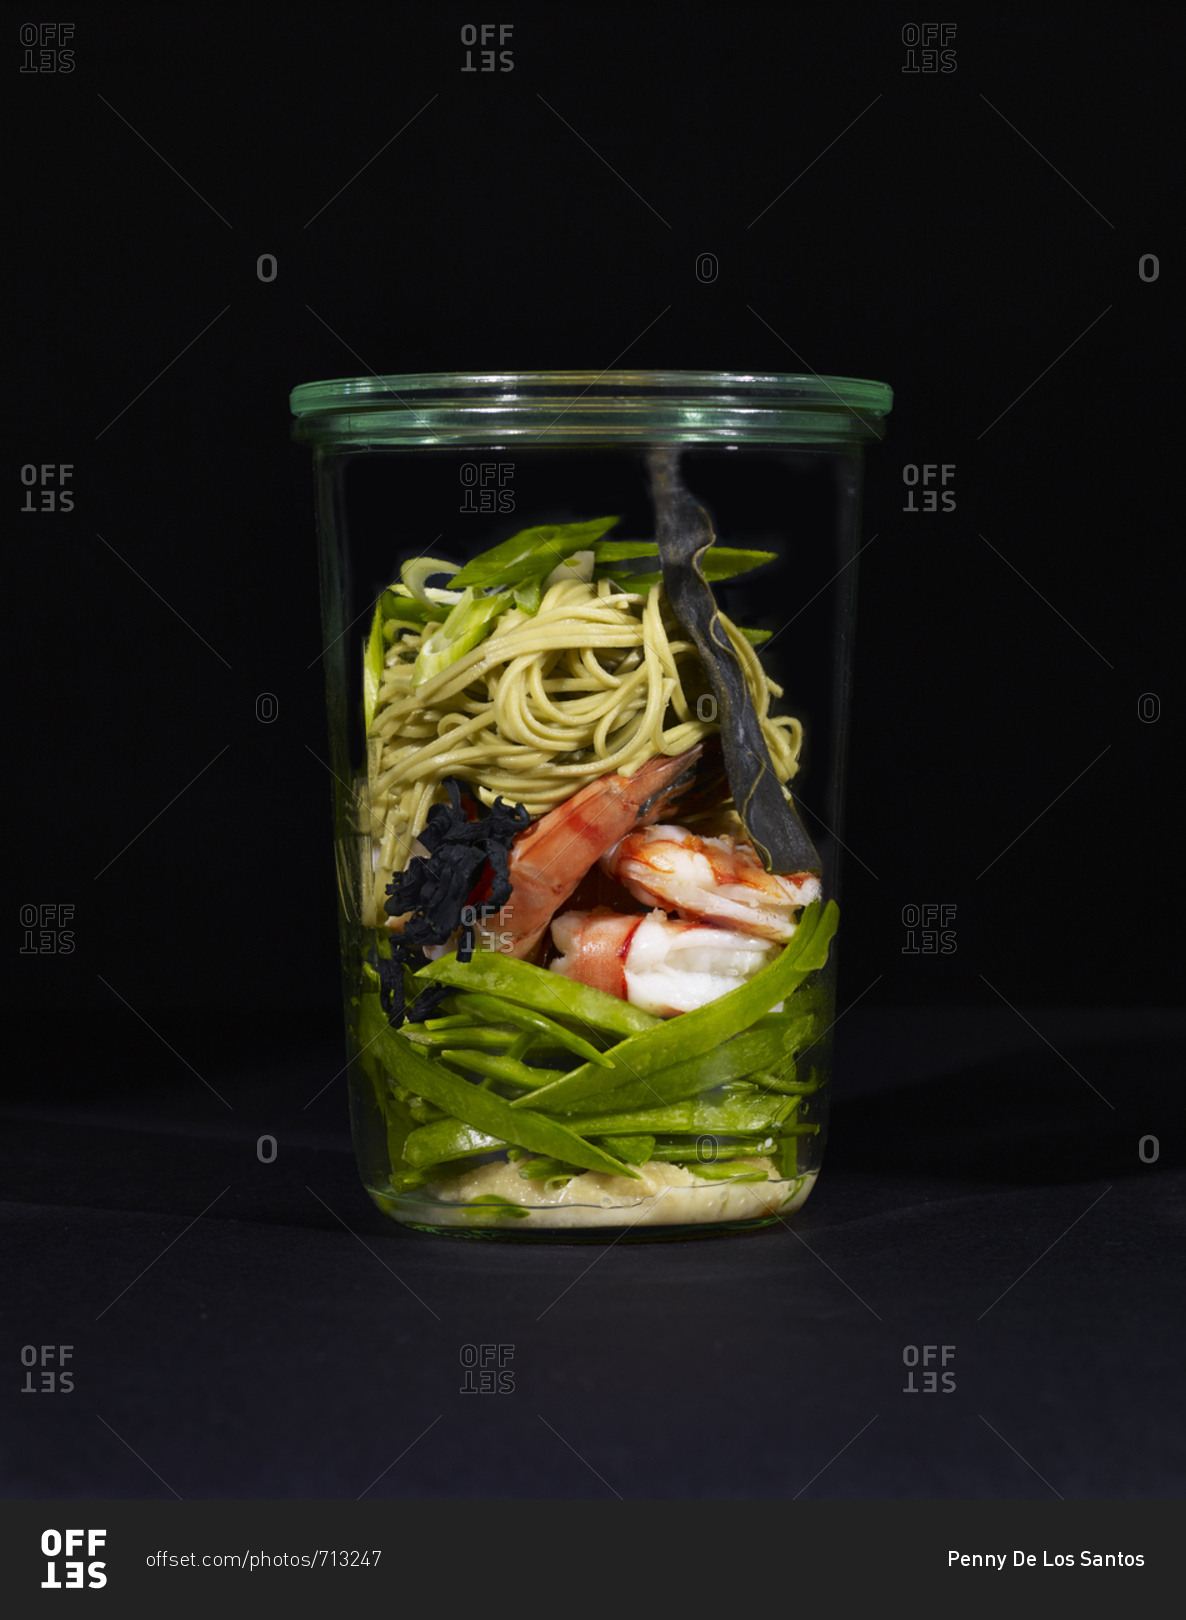 Ingredients for miso soup with shrimp, soba noodles, and green tea leaves in a cup